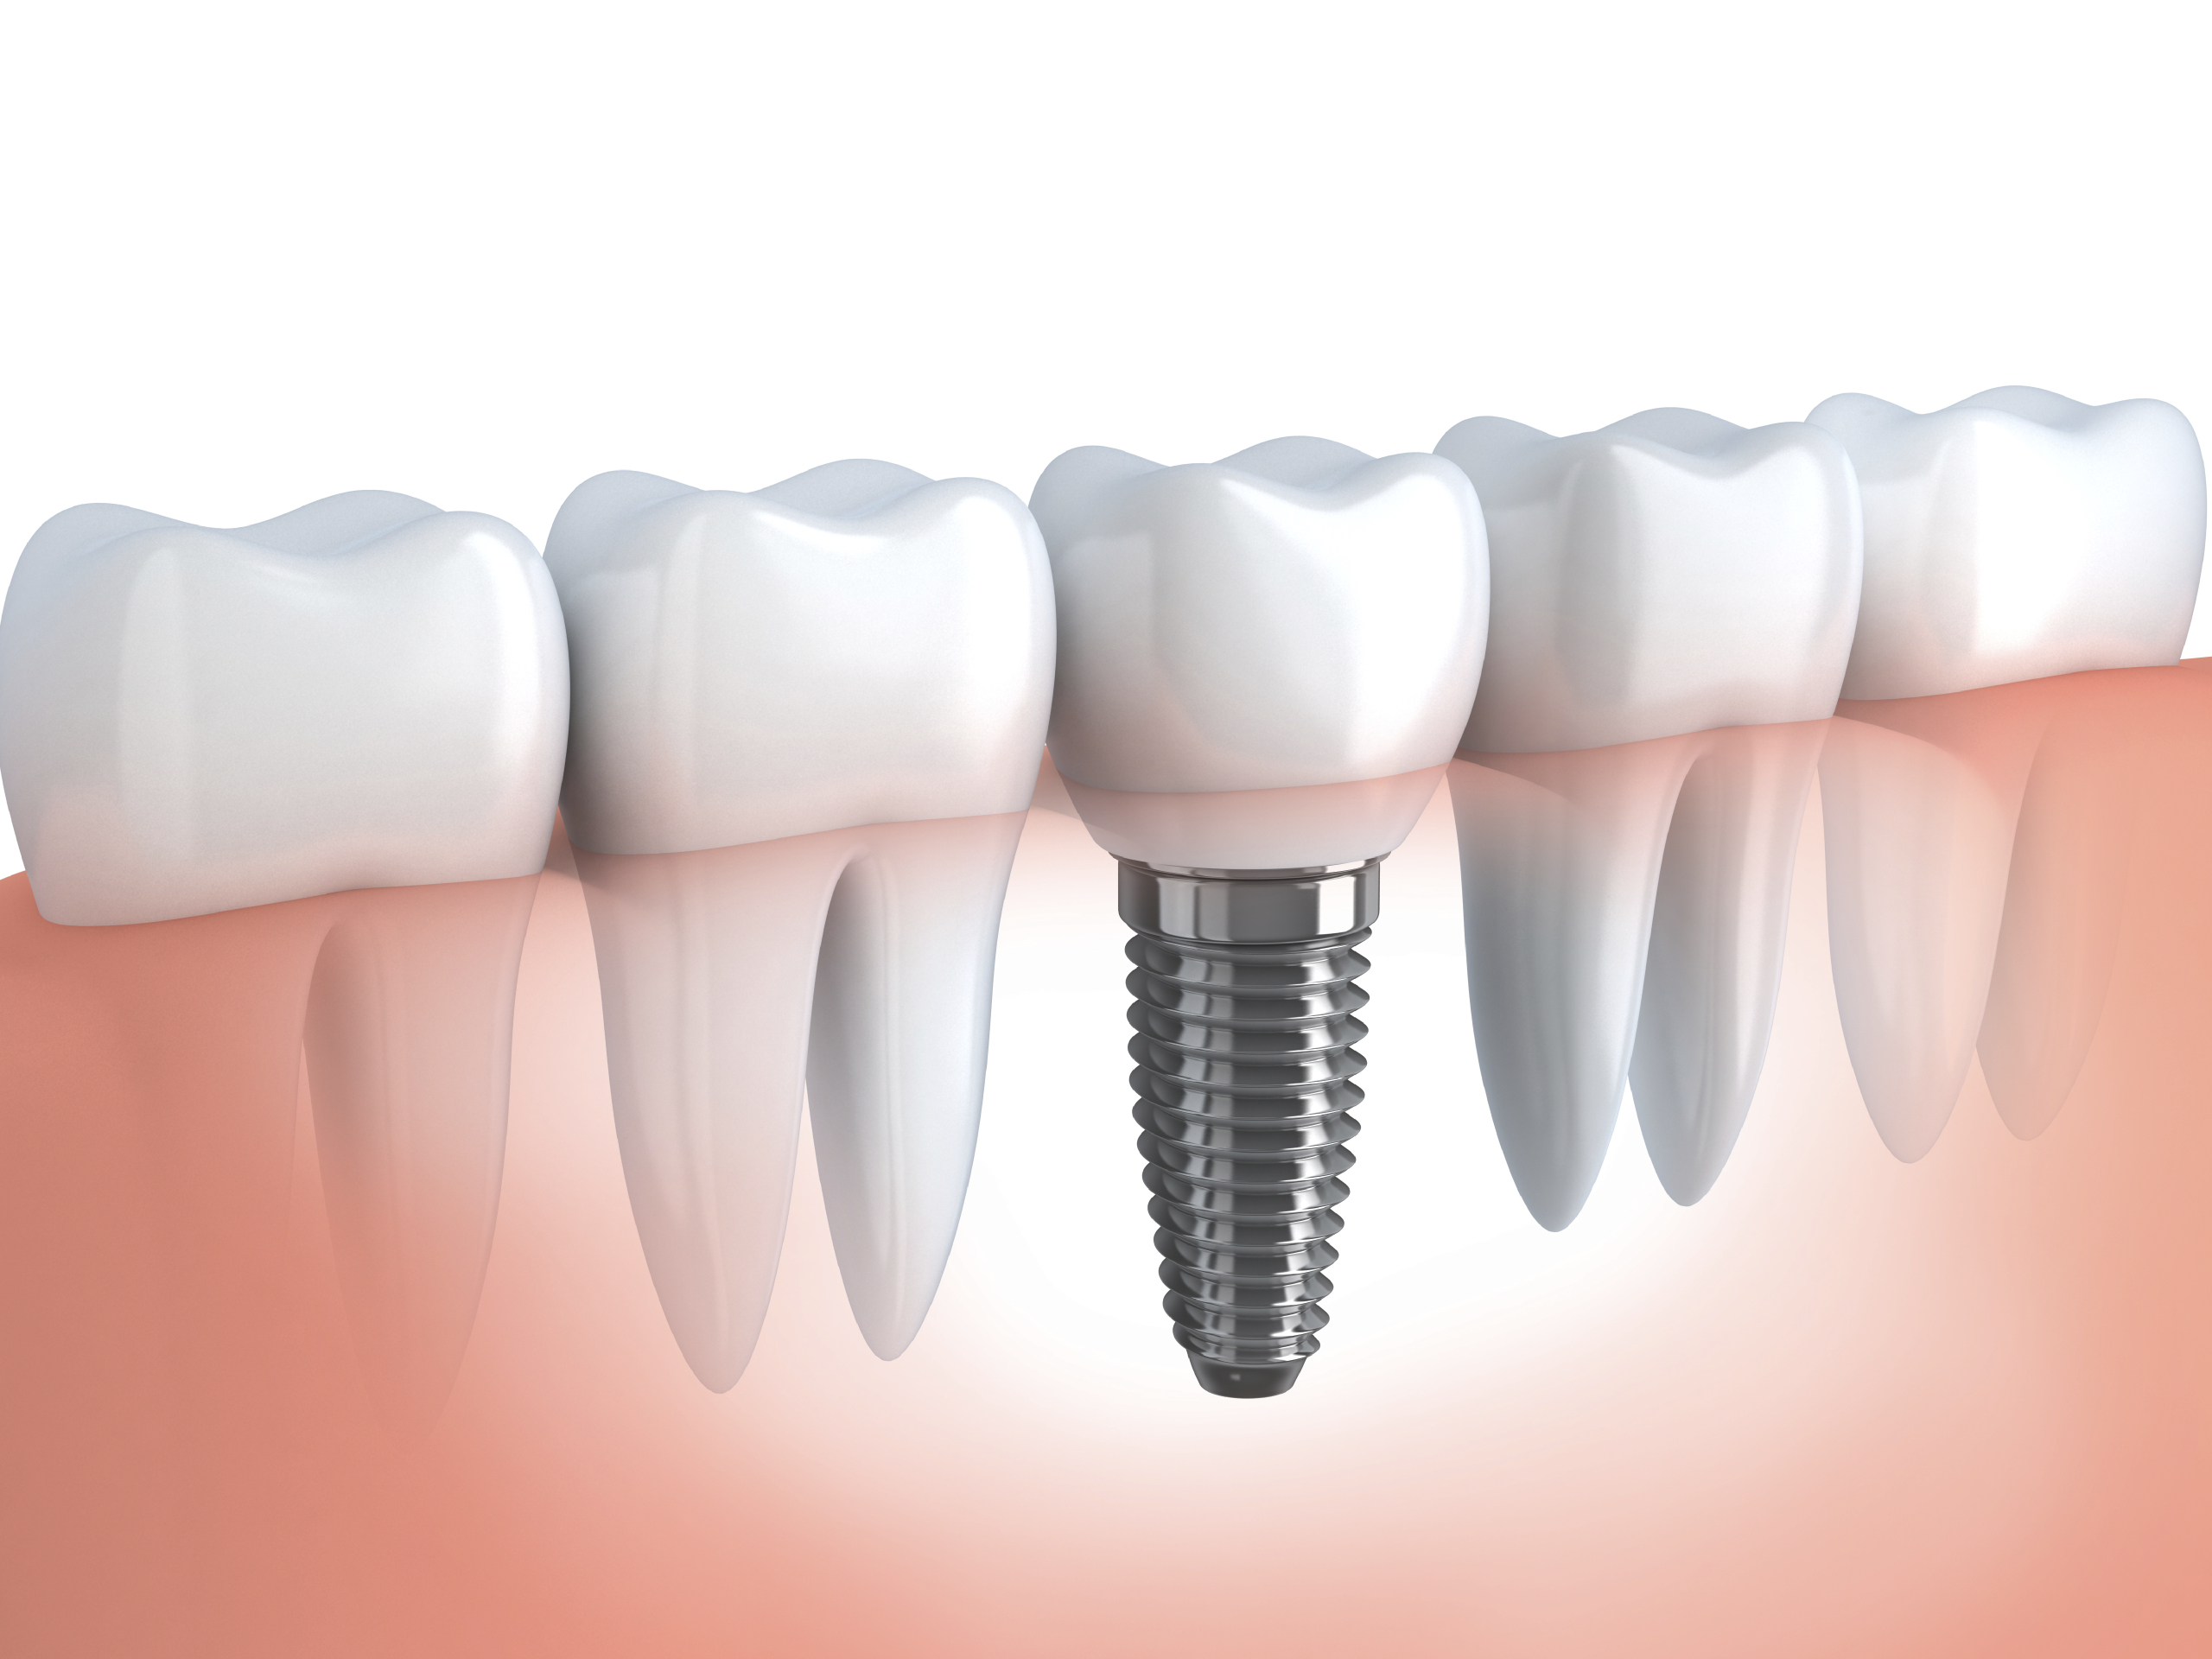 Dental Implant Facts: Your Tooth Replacement Option in Wilton Manors, FL